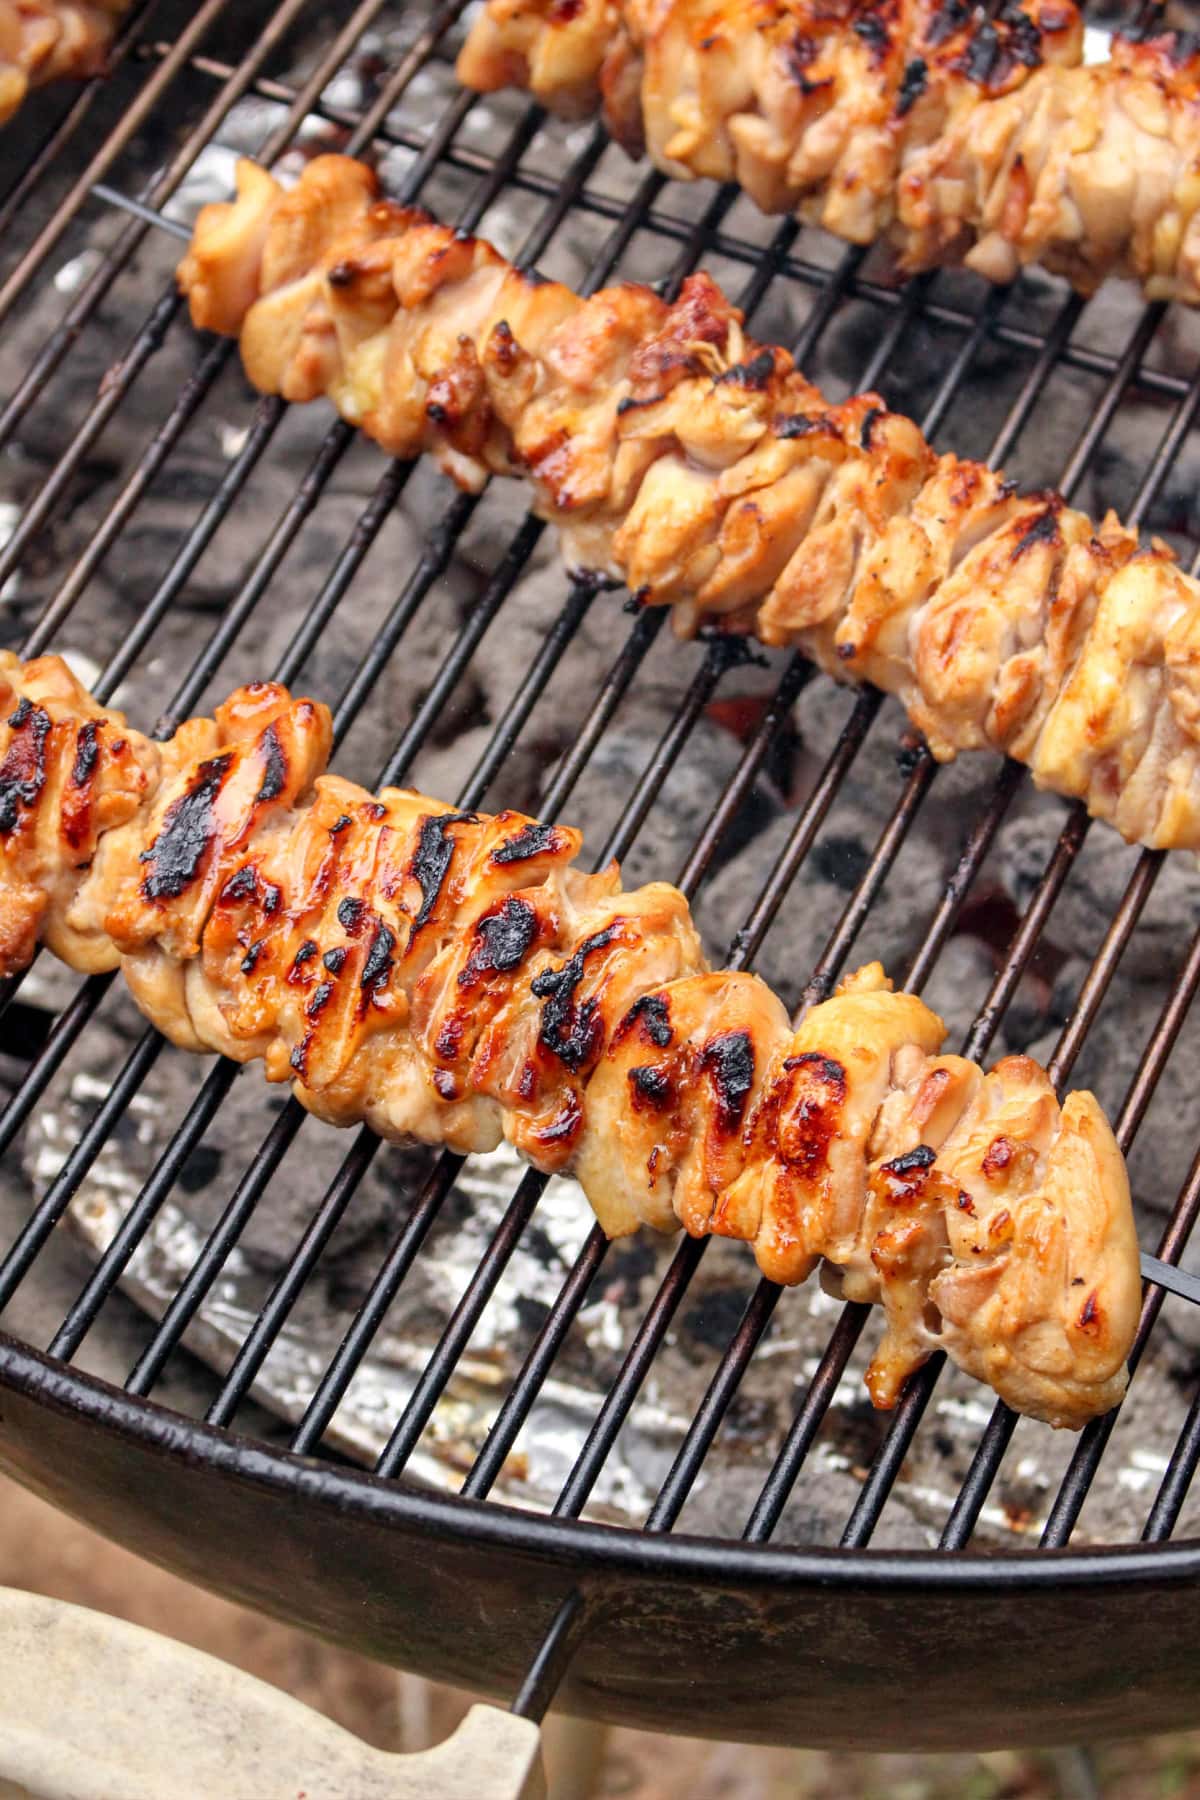 Chicken kabobs cooking over charcoal